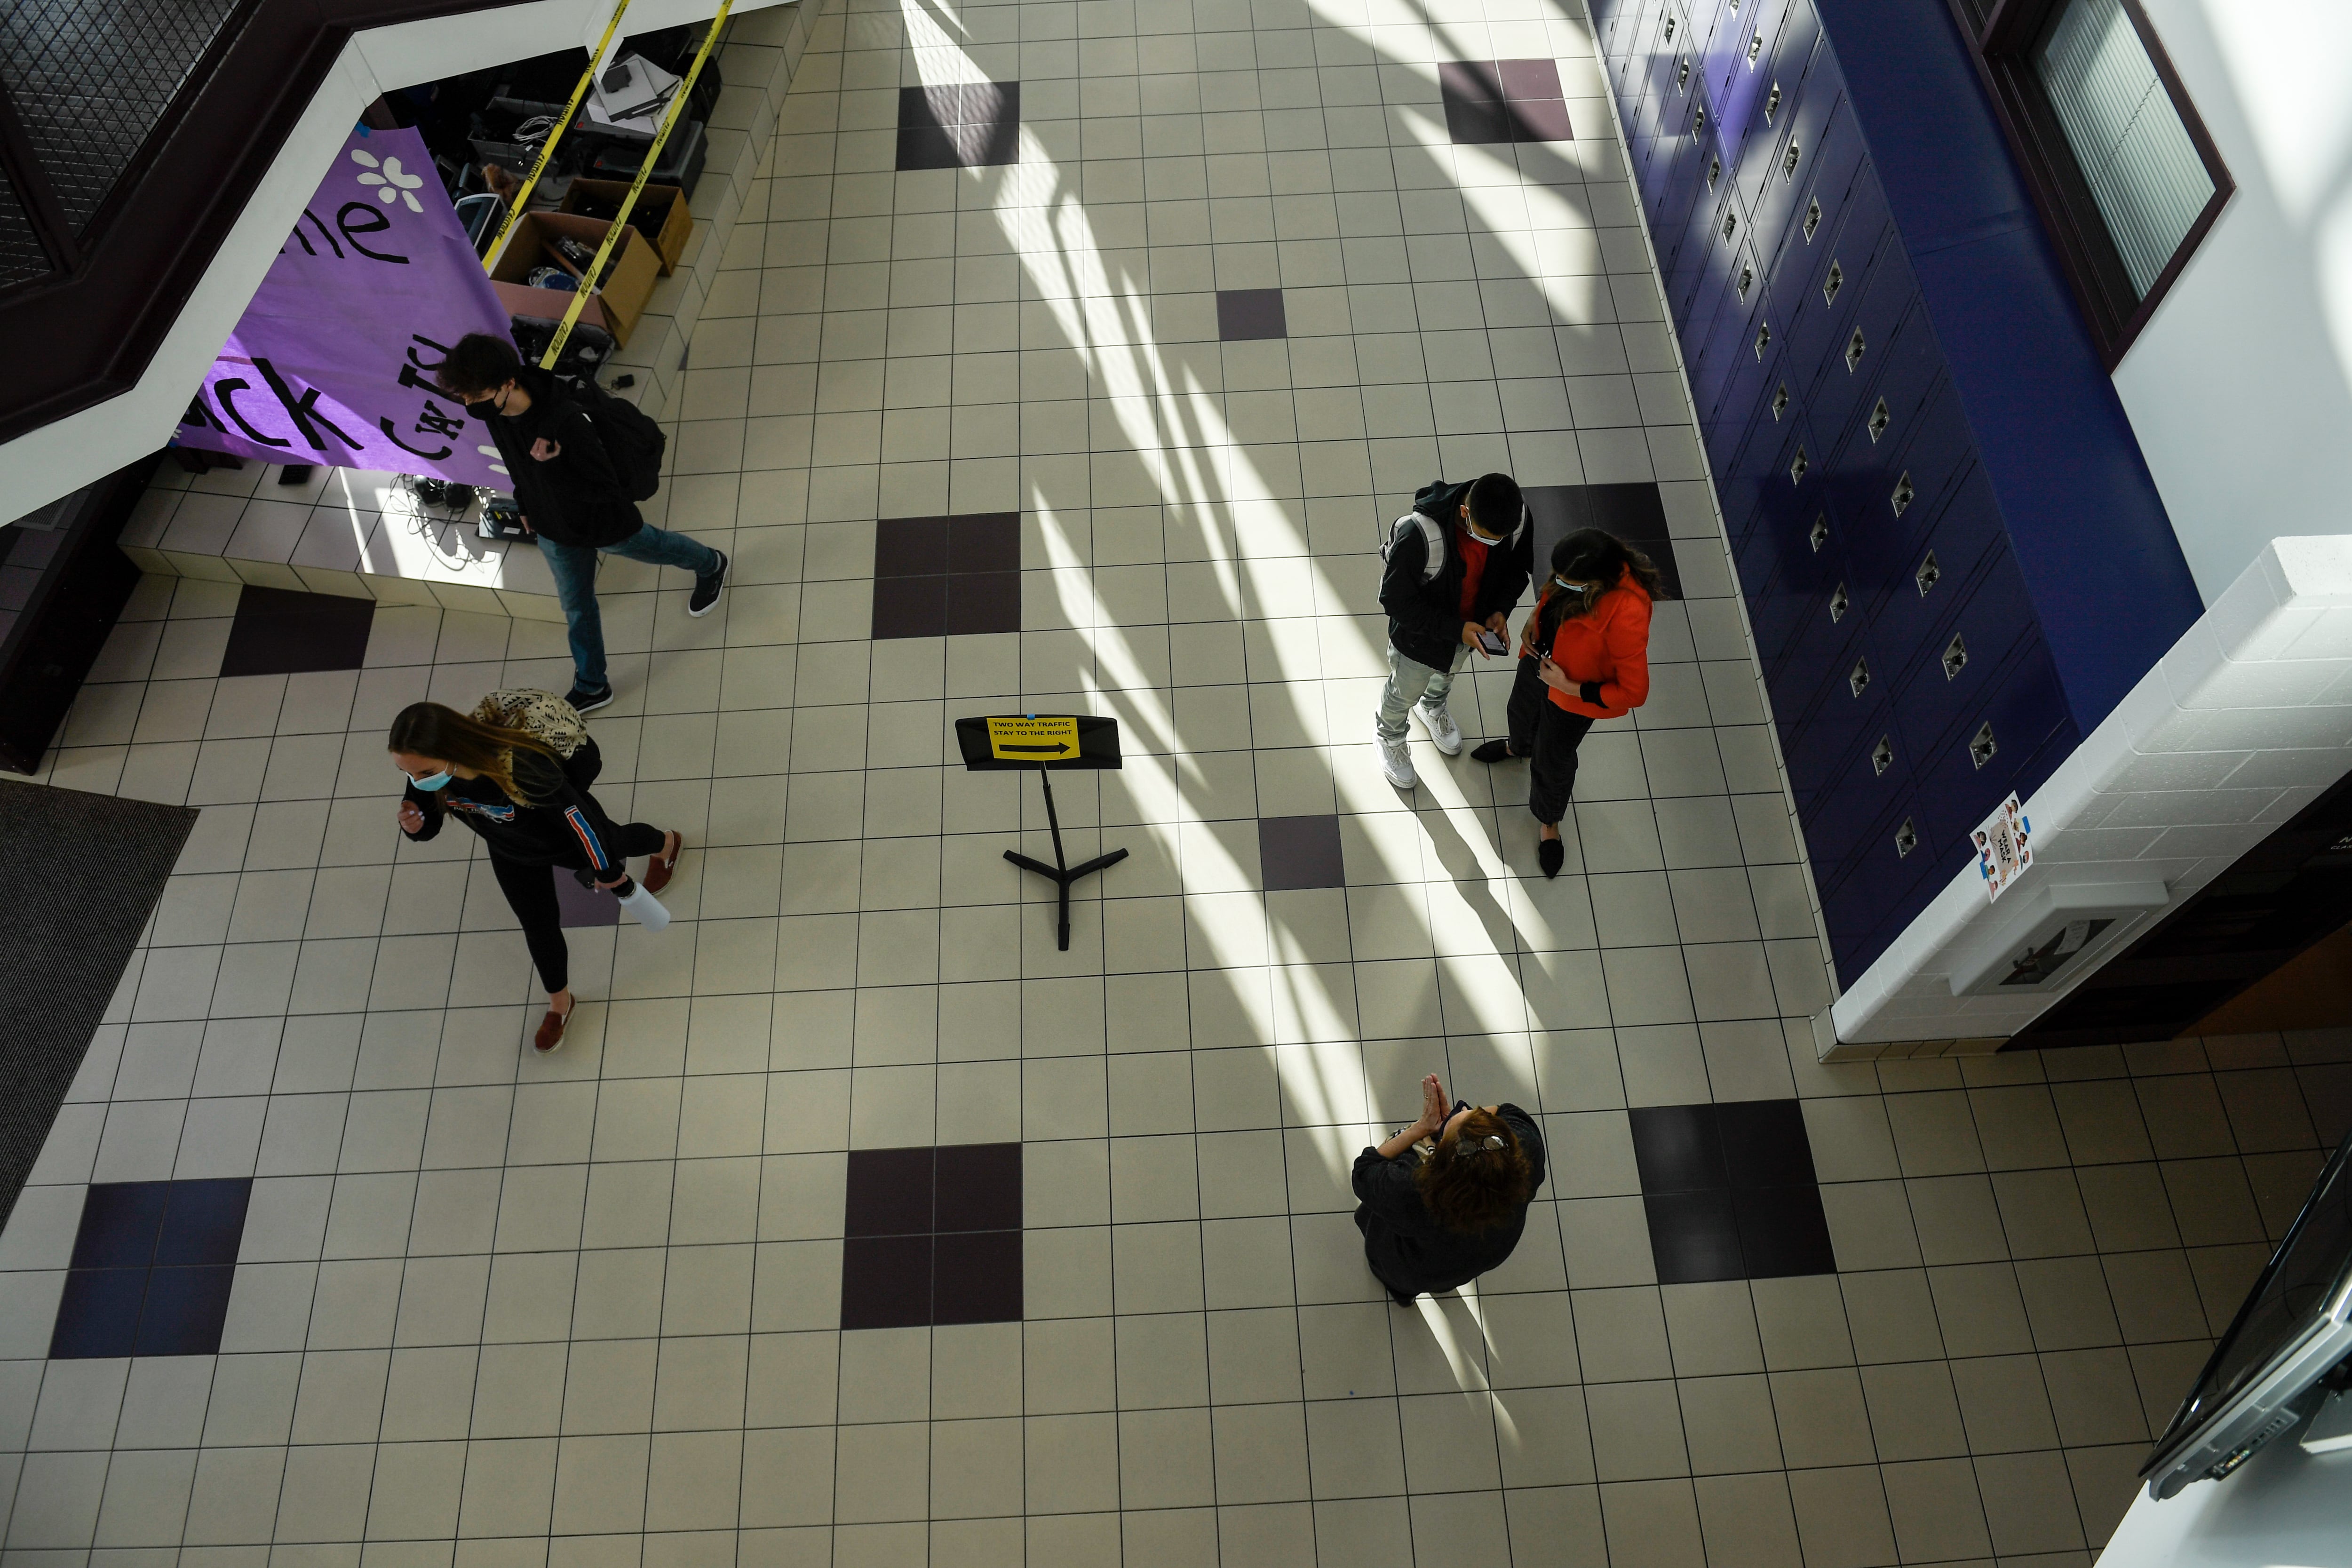 Students walk the halls in small groups between classes during the first day of in-person learning at a high school in Jefferson County, Colorado.